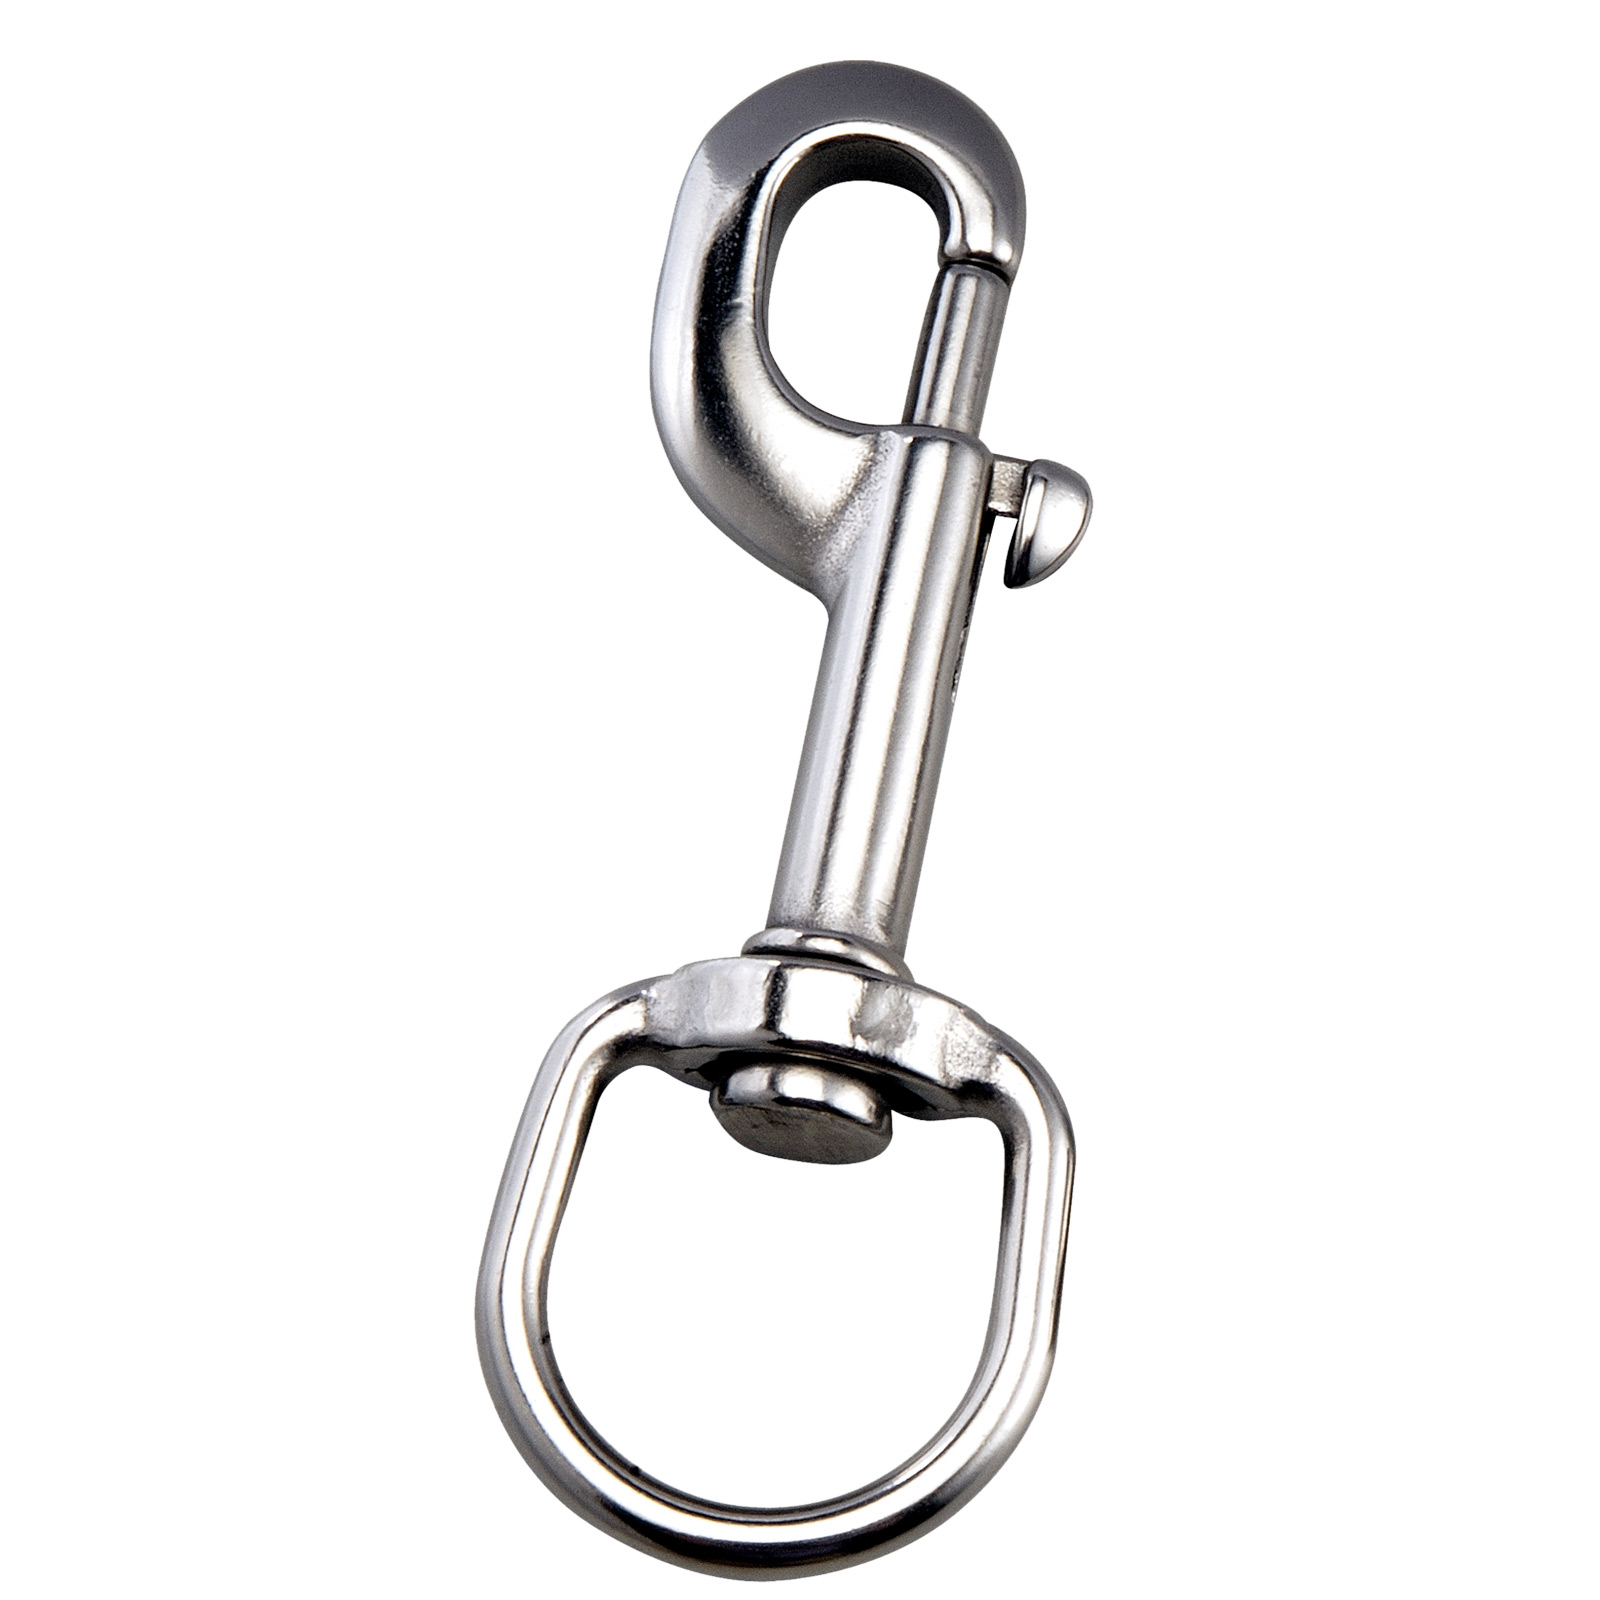 IST Diving System :: RECREATIONAL :: ACCESSORIES :: Big Stainless Steel Clip